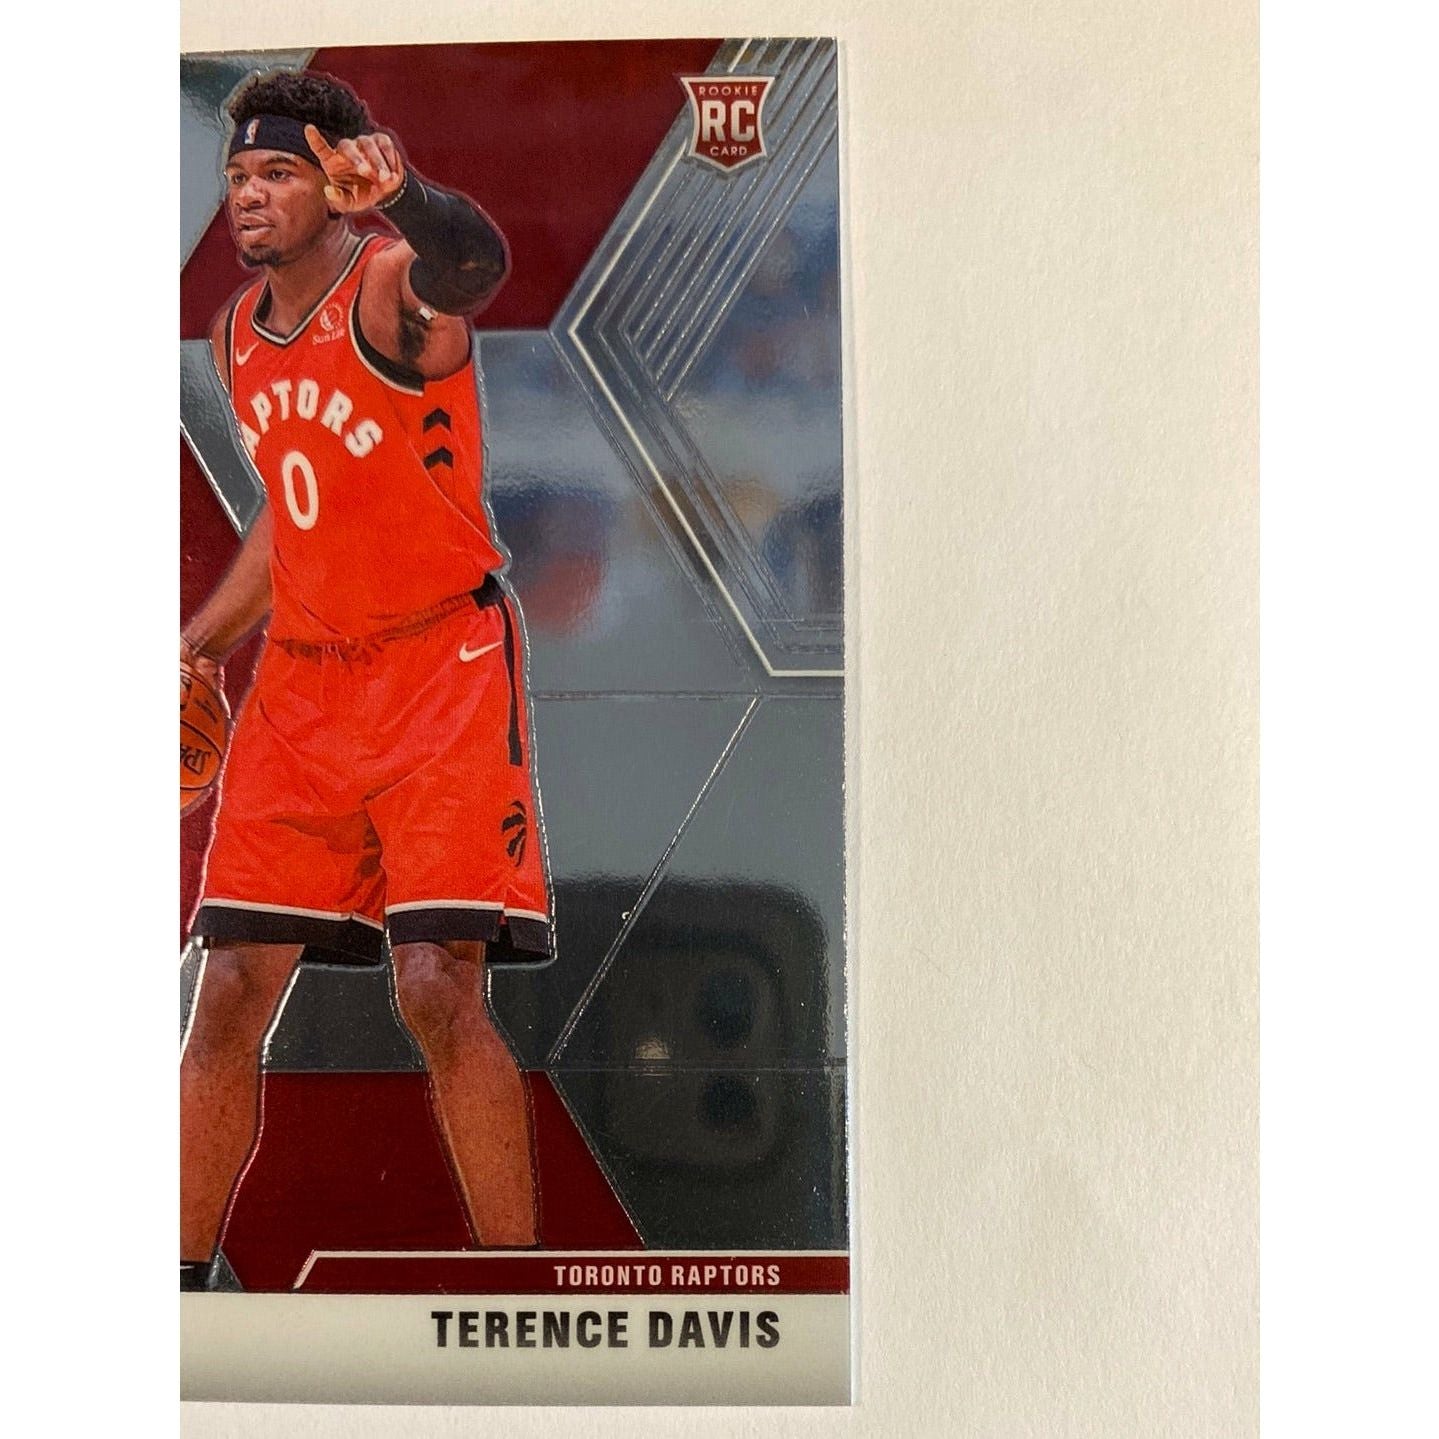  2019-20 Mosaic Terence Davis RC  Local Legends Cards & Collectibles